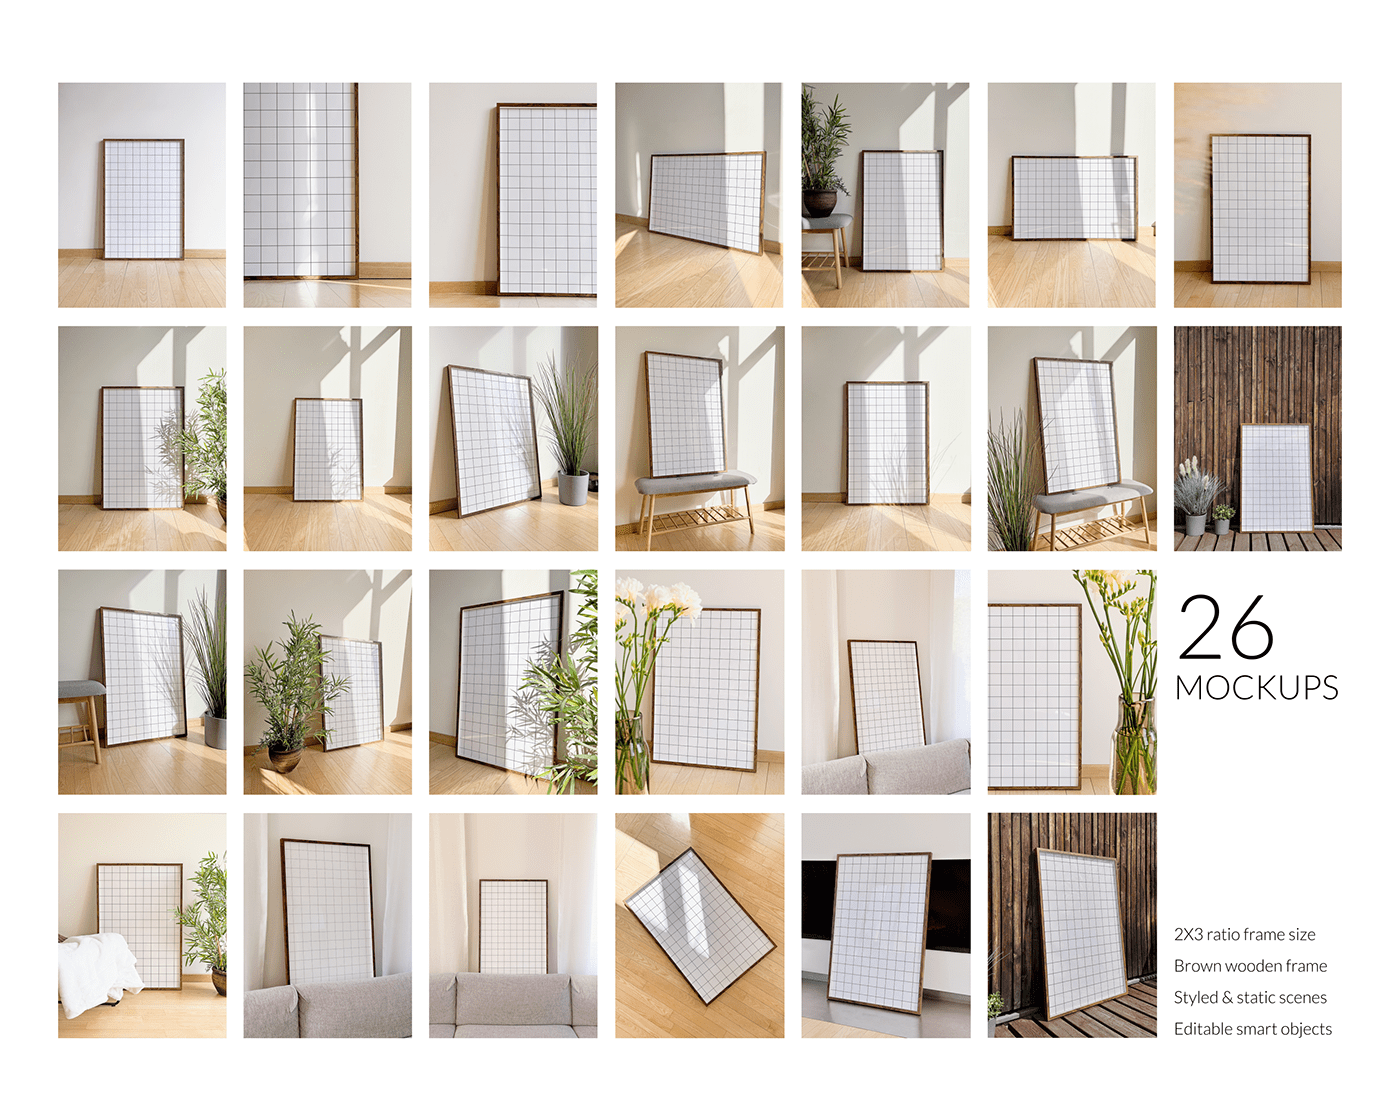 26 2x3 ratio brown wooden frame adjustable .psd mockups download in a minimalist, sunny interior